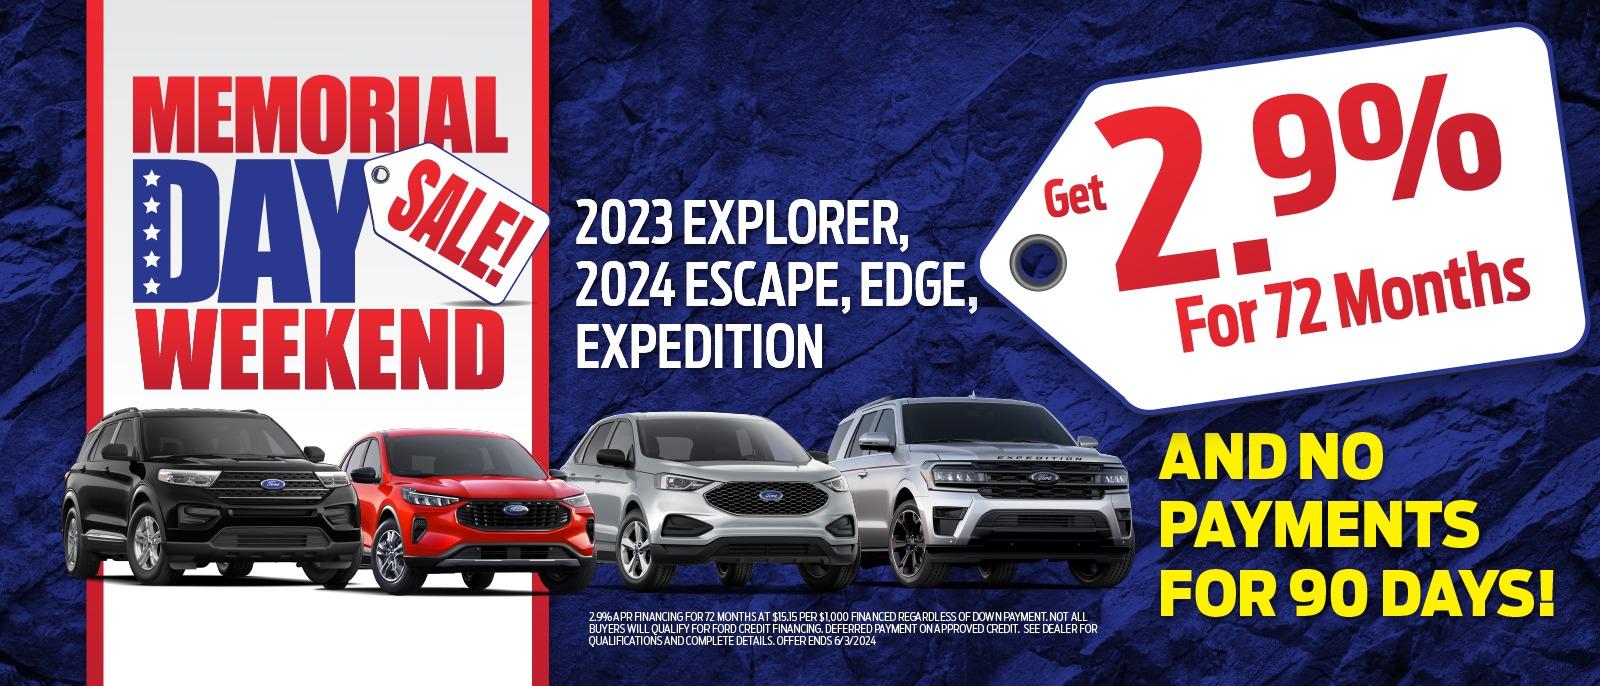 2023 Explorer, 2024 Escape, Edge, Expediiton
2.9% for 72 months and no payments for 90 days!